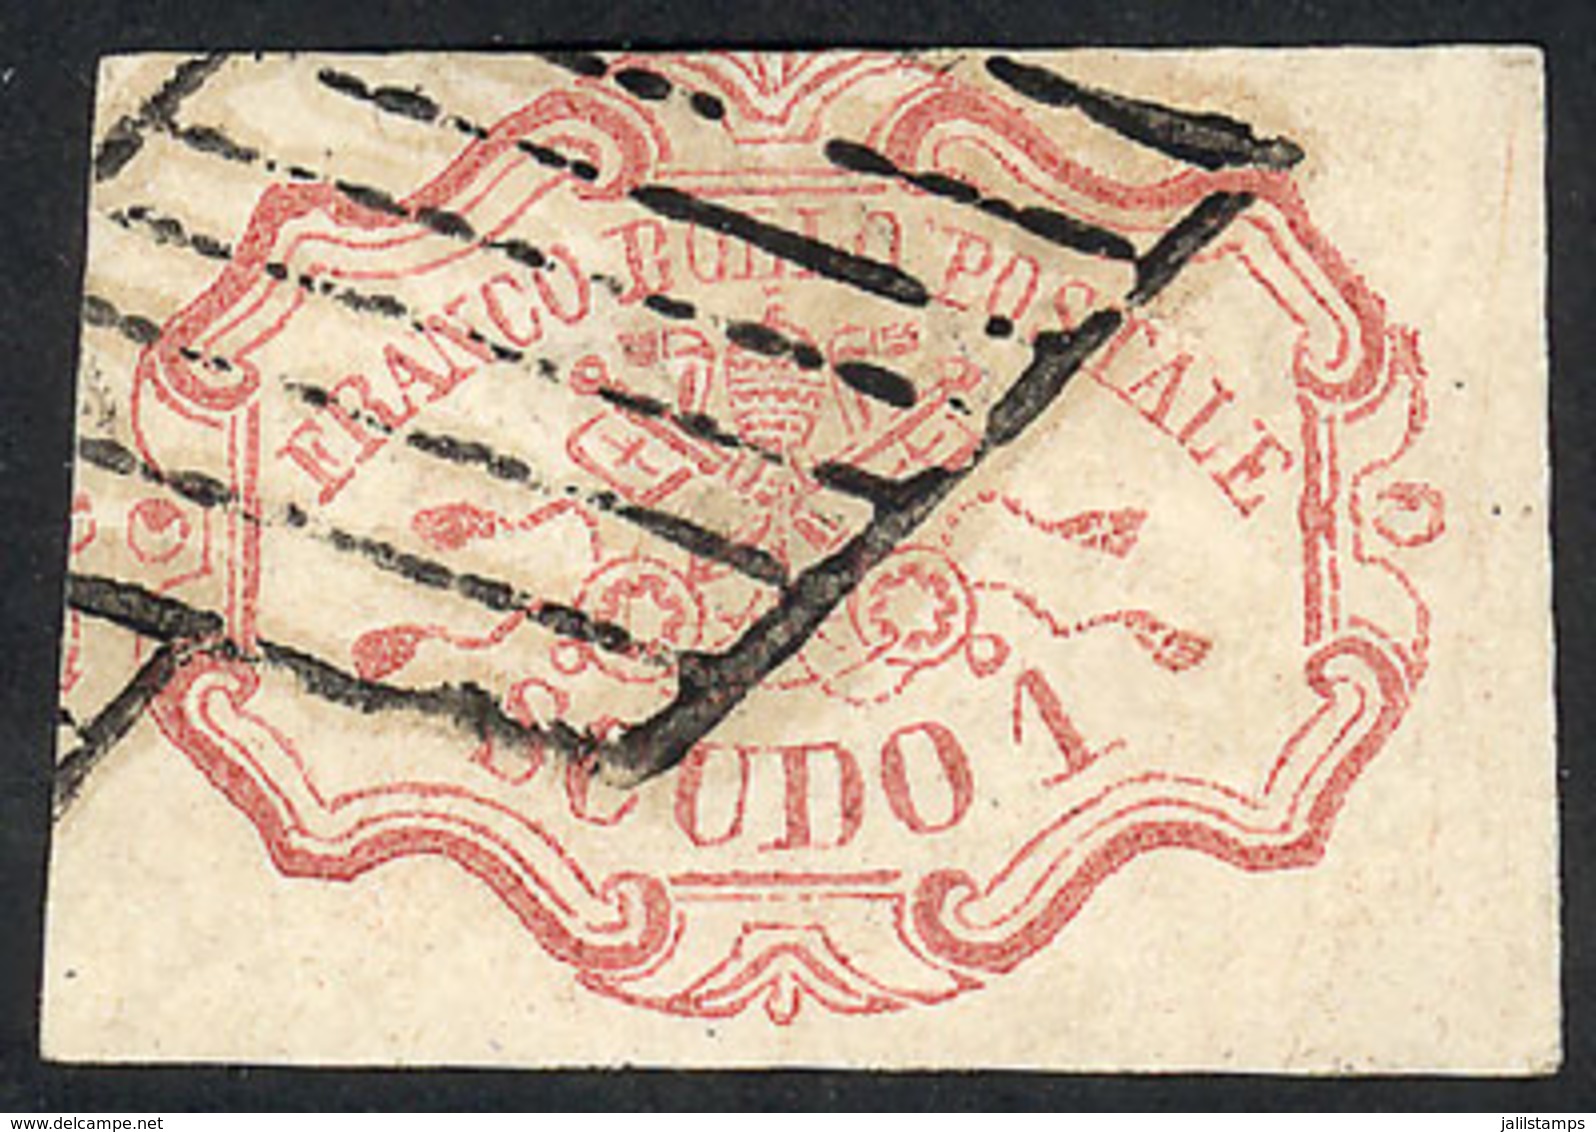 ITALY: Sc.11, 1852 1S. Rose, Used, 3 Very Ample Margins, With Signature And Certificate Of Enzo Diena, Scarce Example, G - Papal States